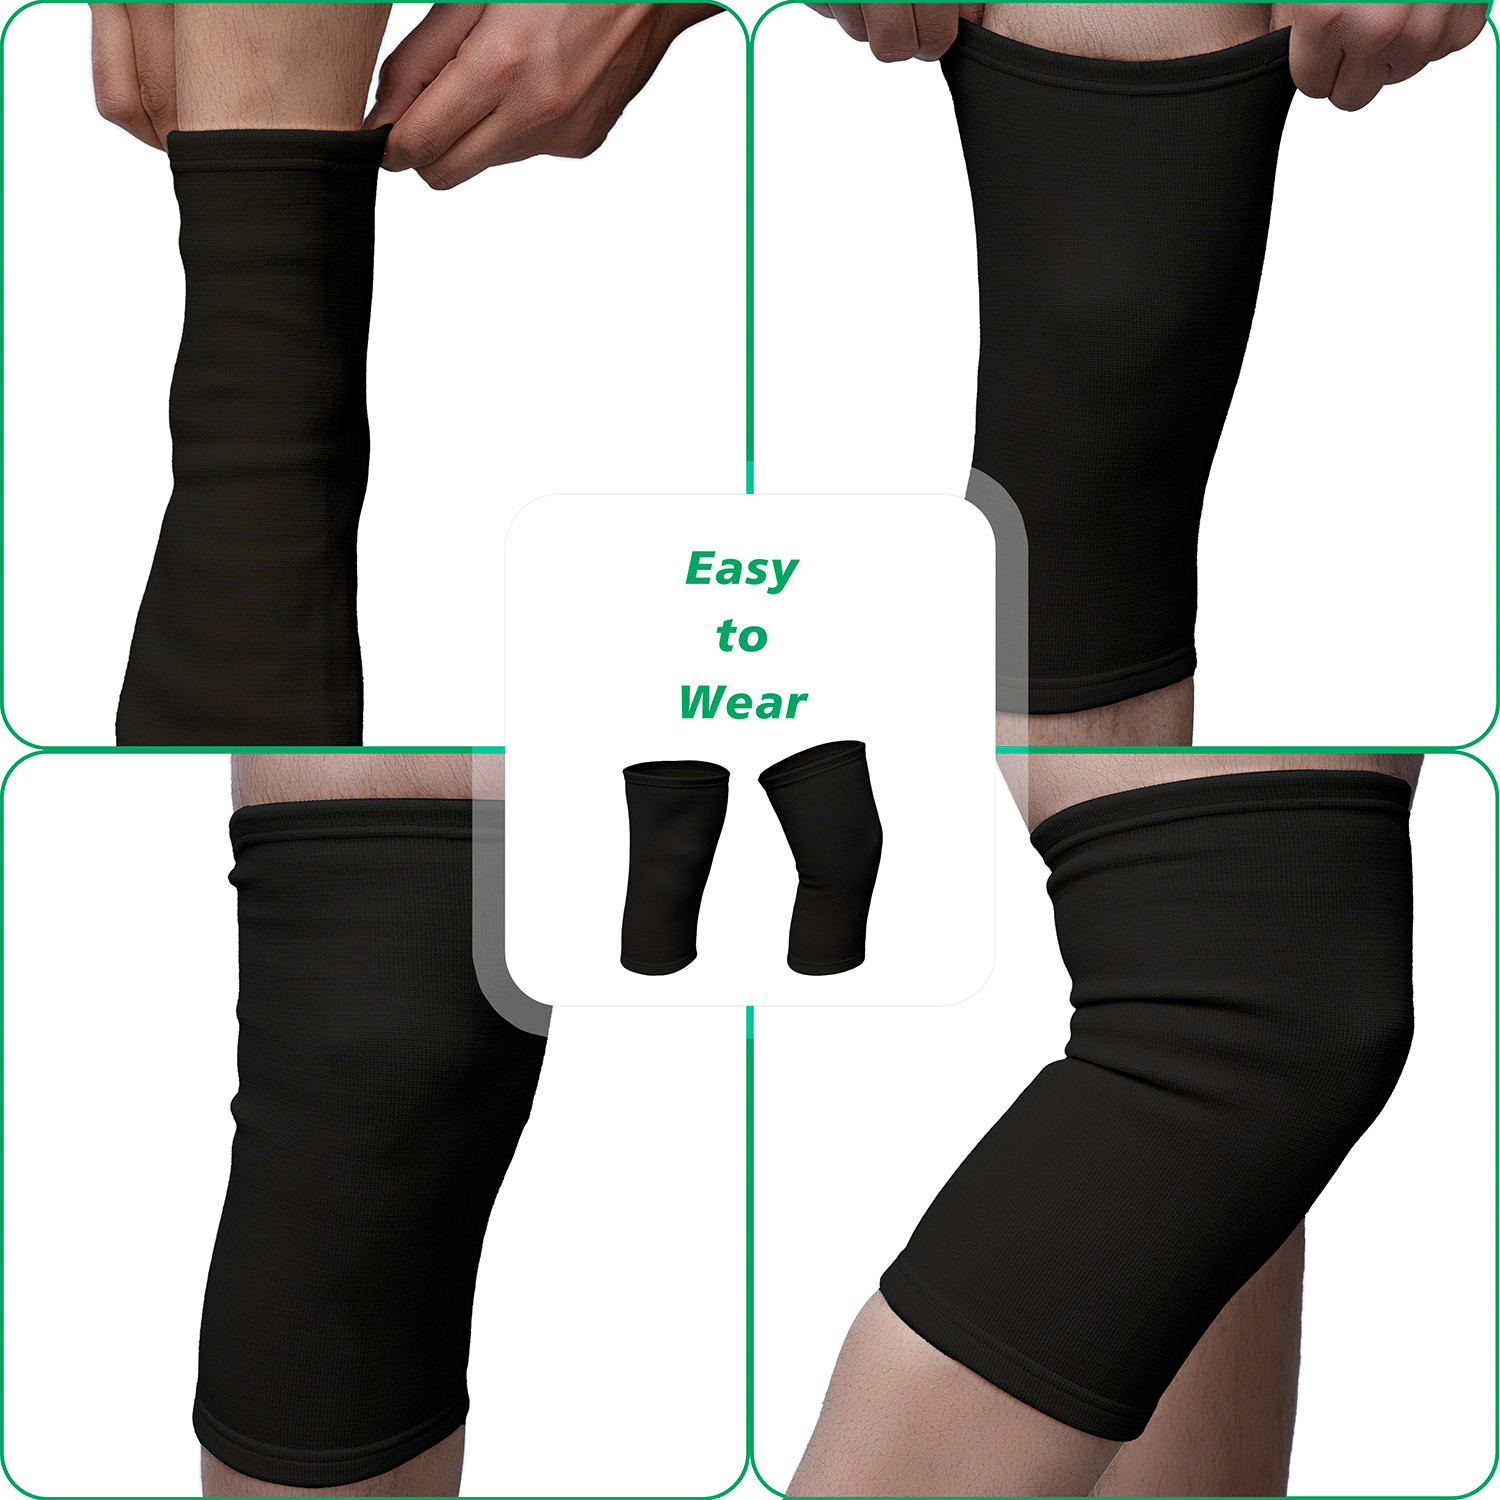 Kuber Industries Knee Cap | Cotton 4 Way Compression Knee Sleeves |Sleeves For Joint Pain | Sleeves For Arthritis Relief | Unisex Knee Wraps | Knee Bands |Size-XL|1 Pair|Black